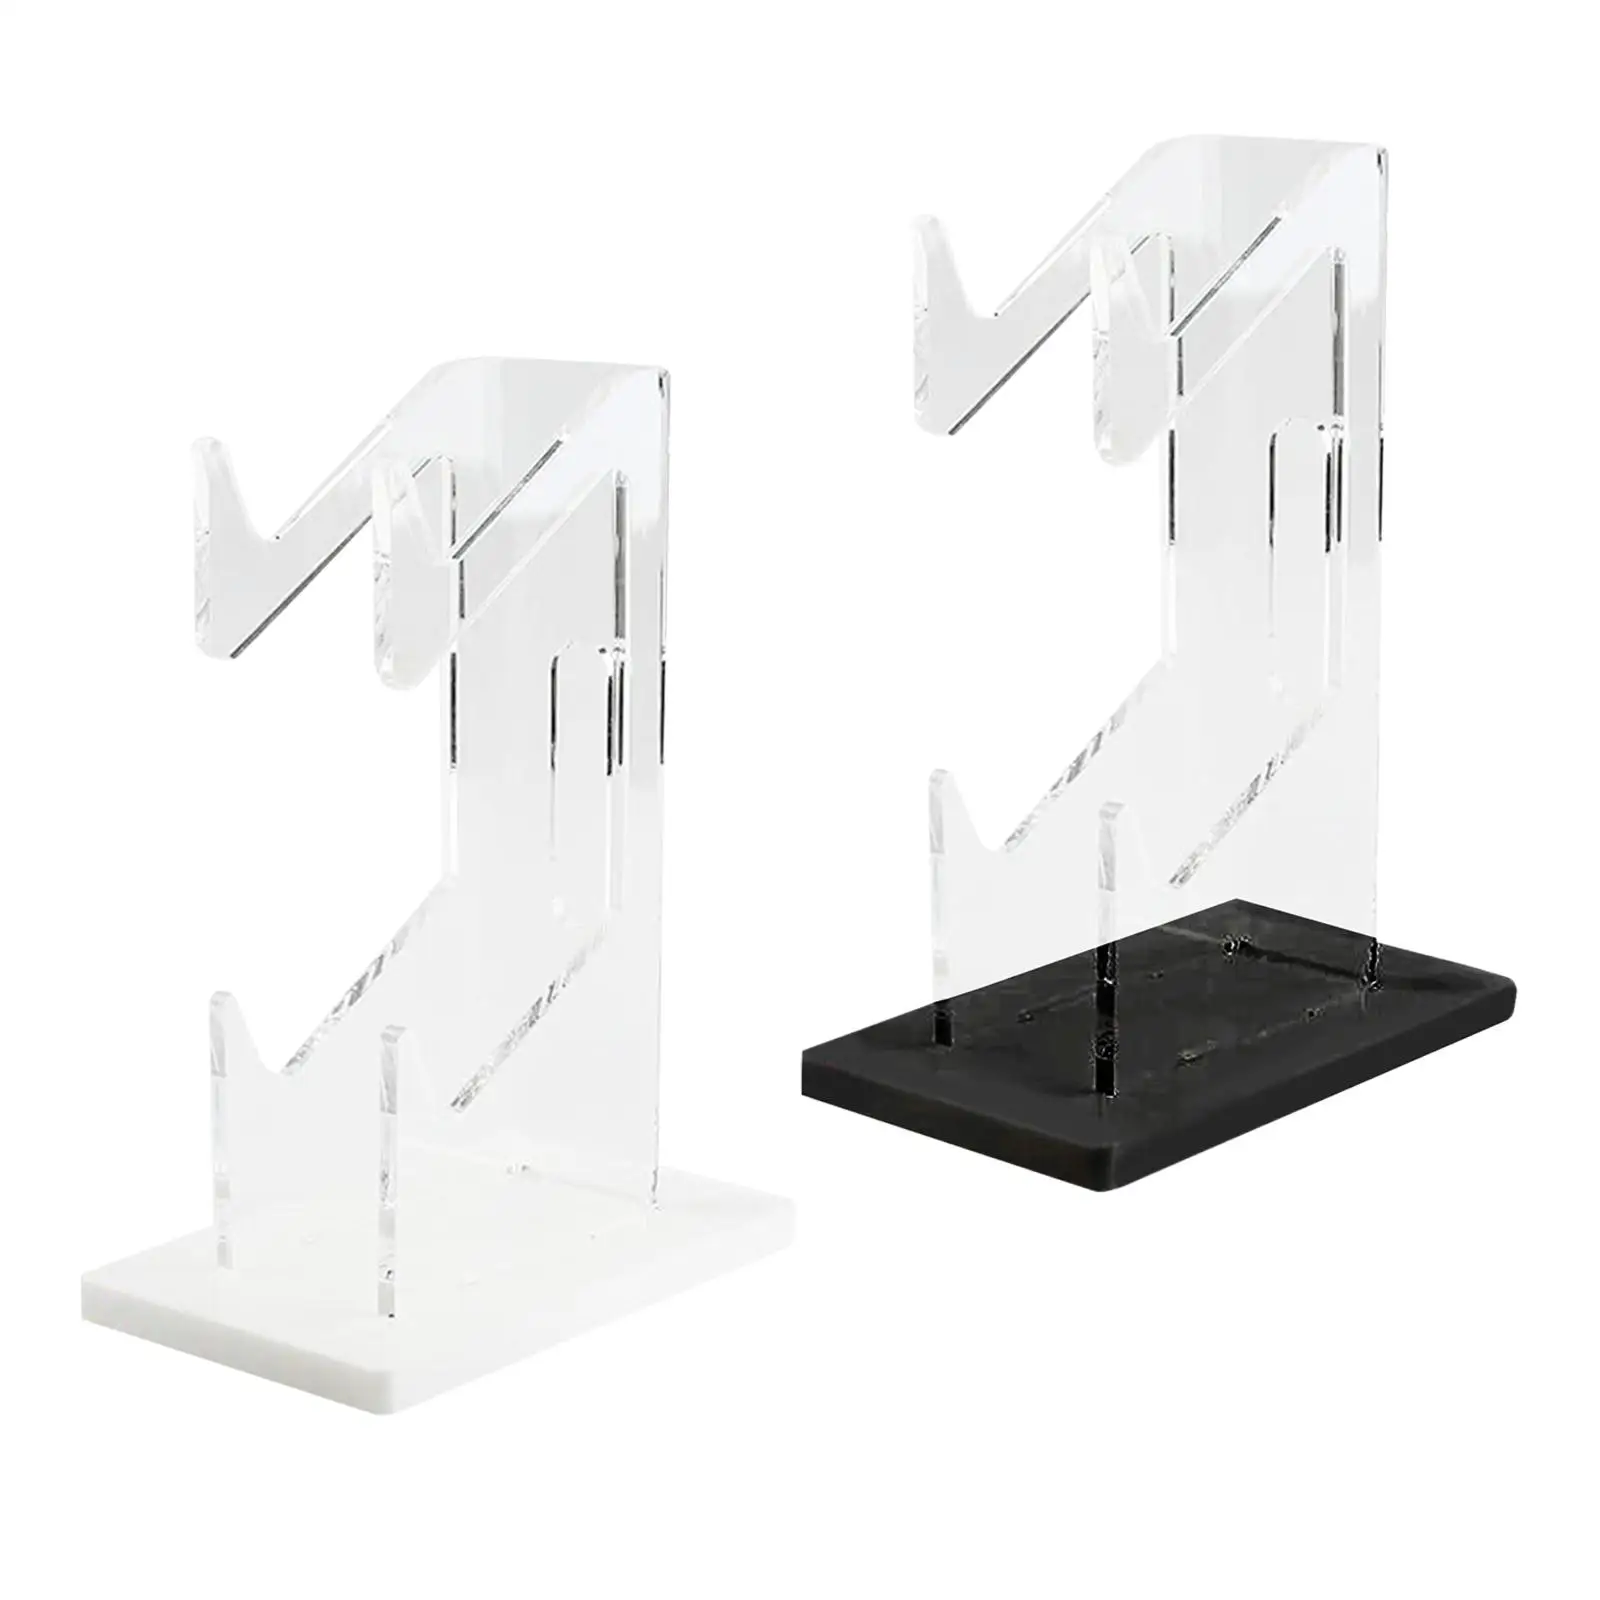 Gamepad Holder Acrylic Display Bracket Game Console Controller Stand Gaming Desk Accessories for PS5/PS4/ One/S/x Series